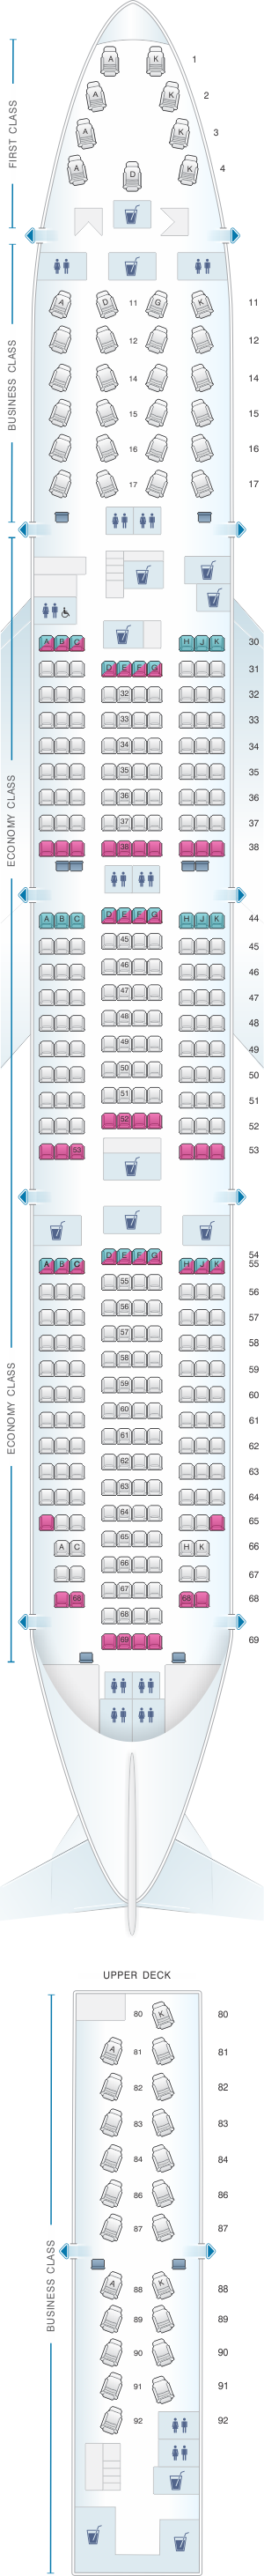 Seat map for Cathay Pacific Airways Boeing B747 400 (74A)